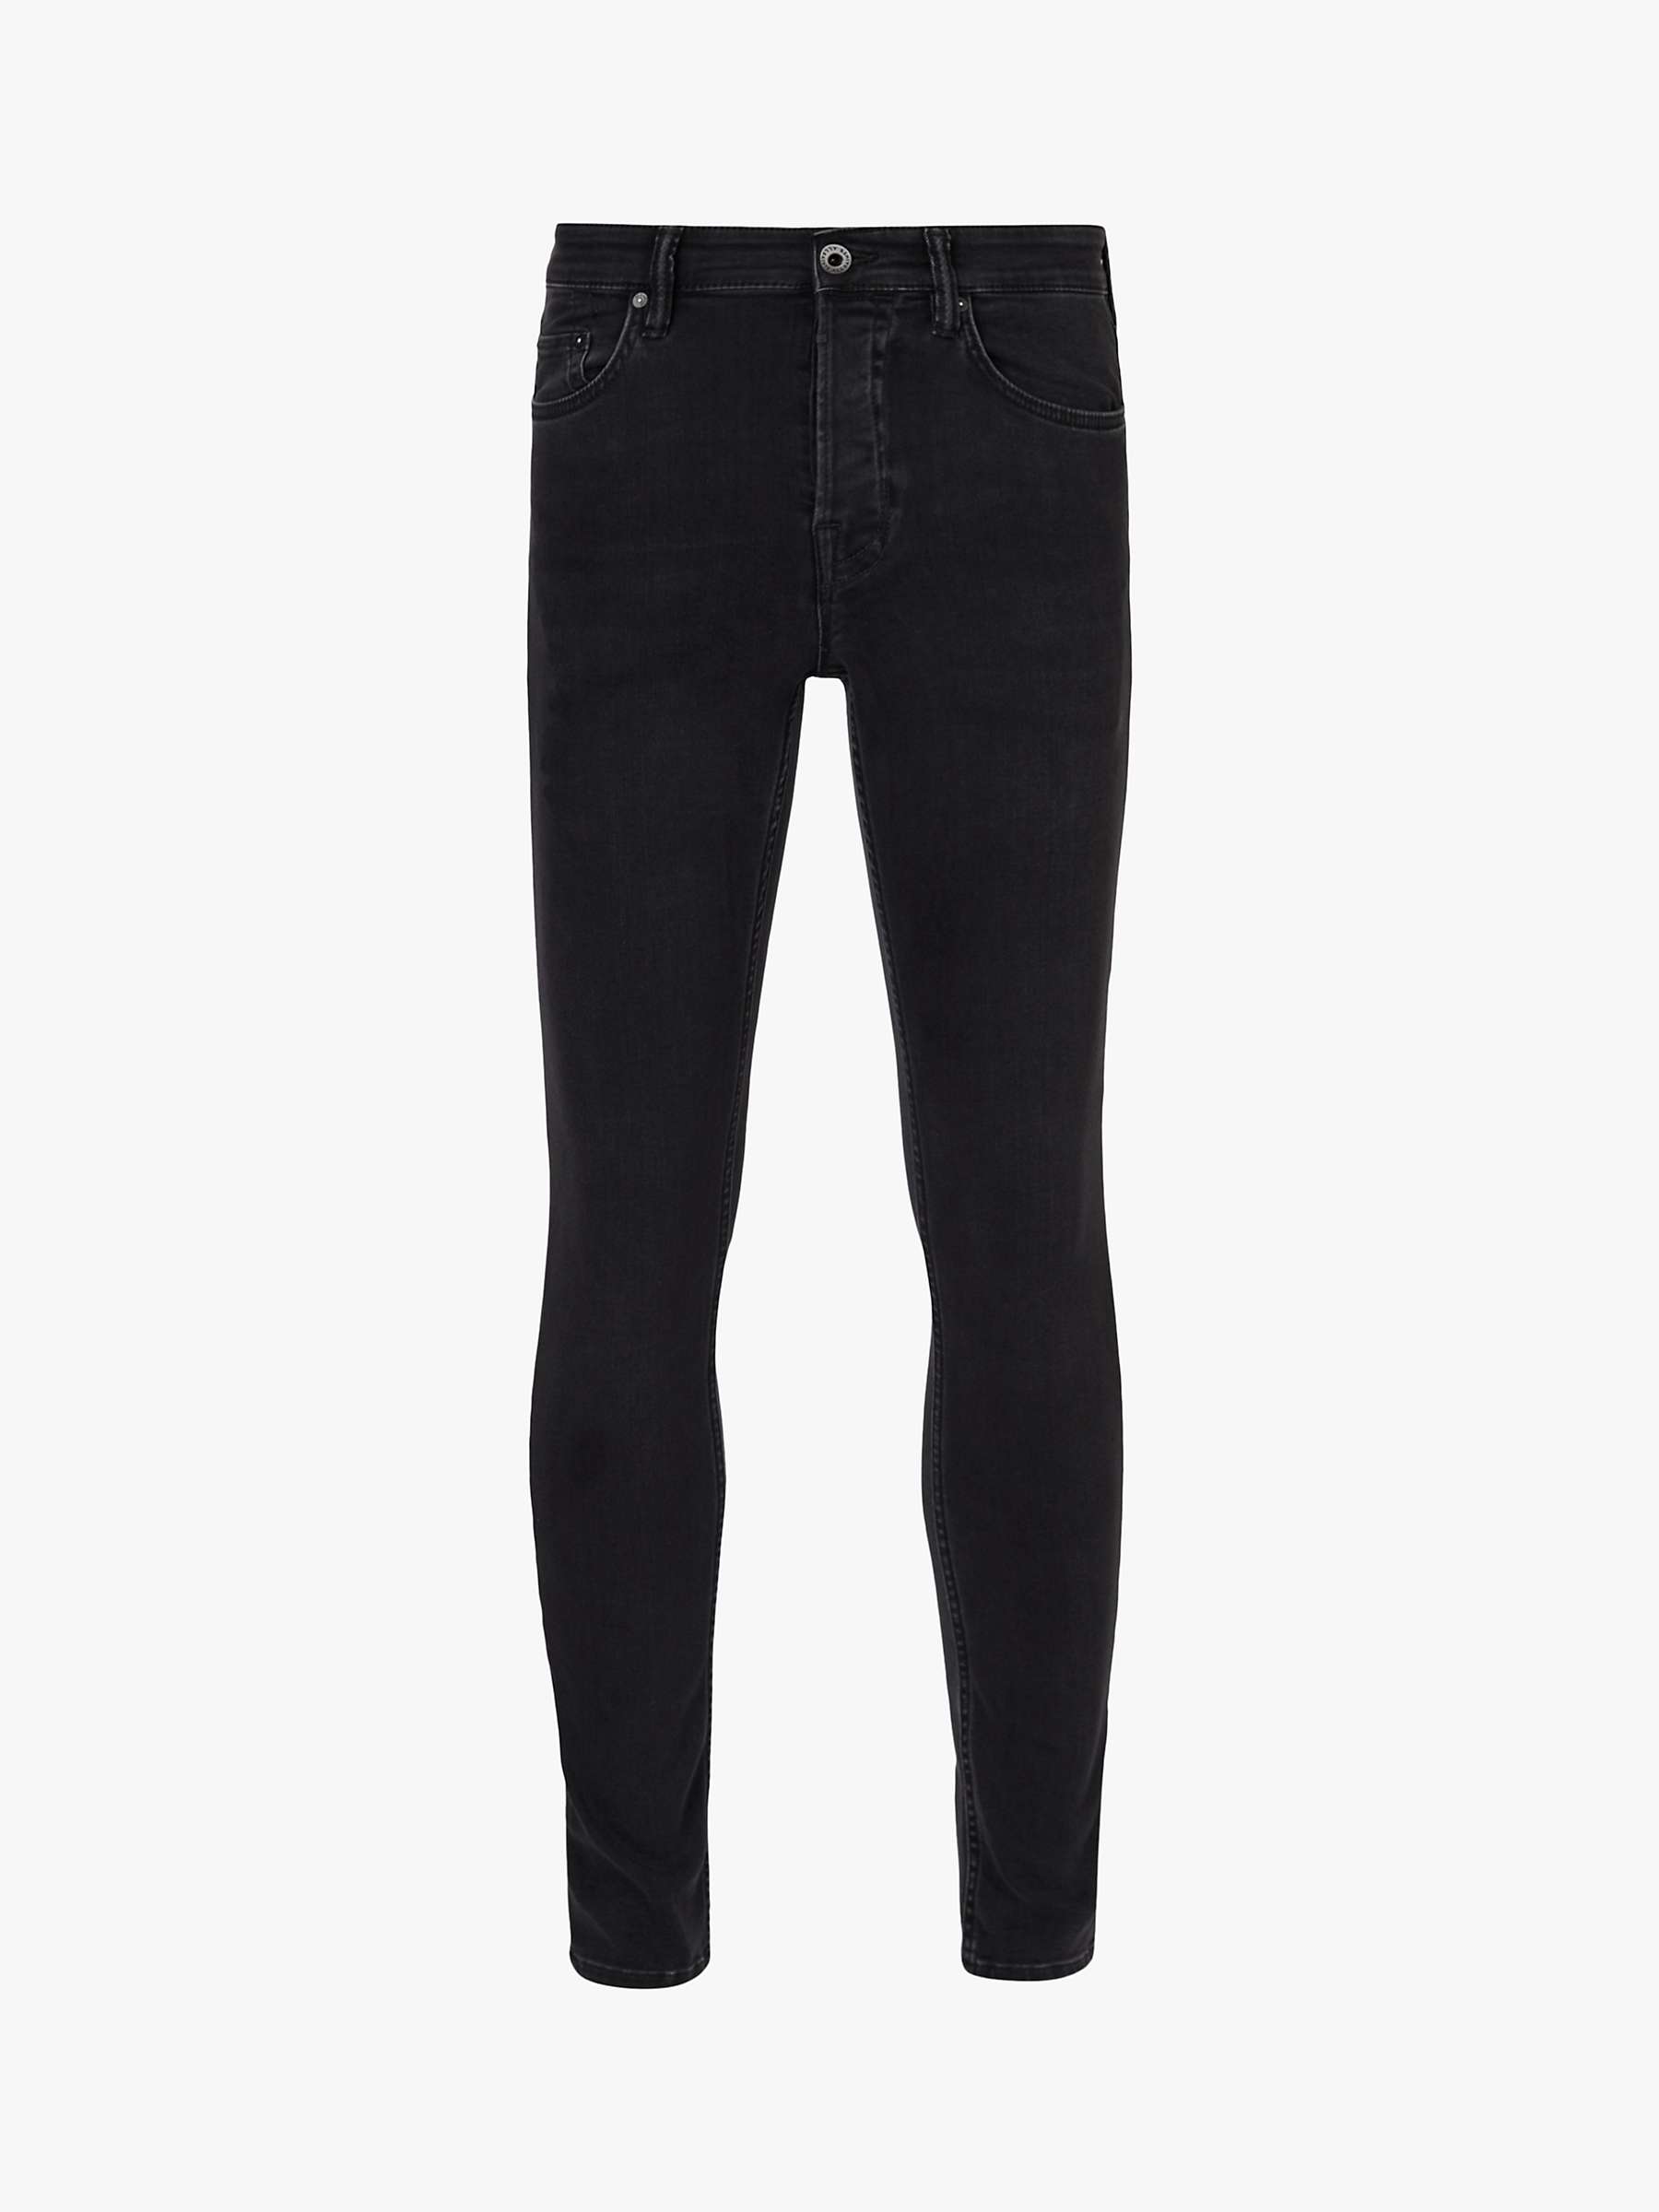 Buy AllSaints Ronnie Skinny Jeans, Washed Black Online at johnlewis.com